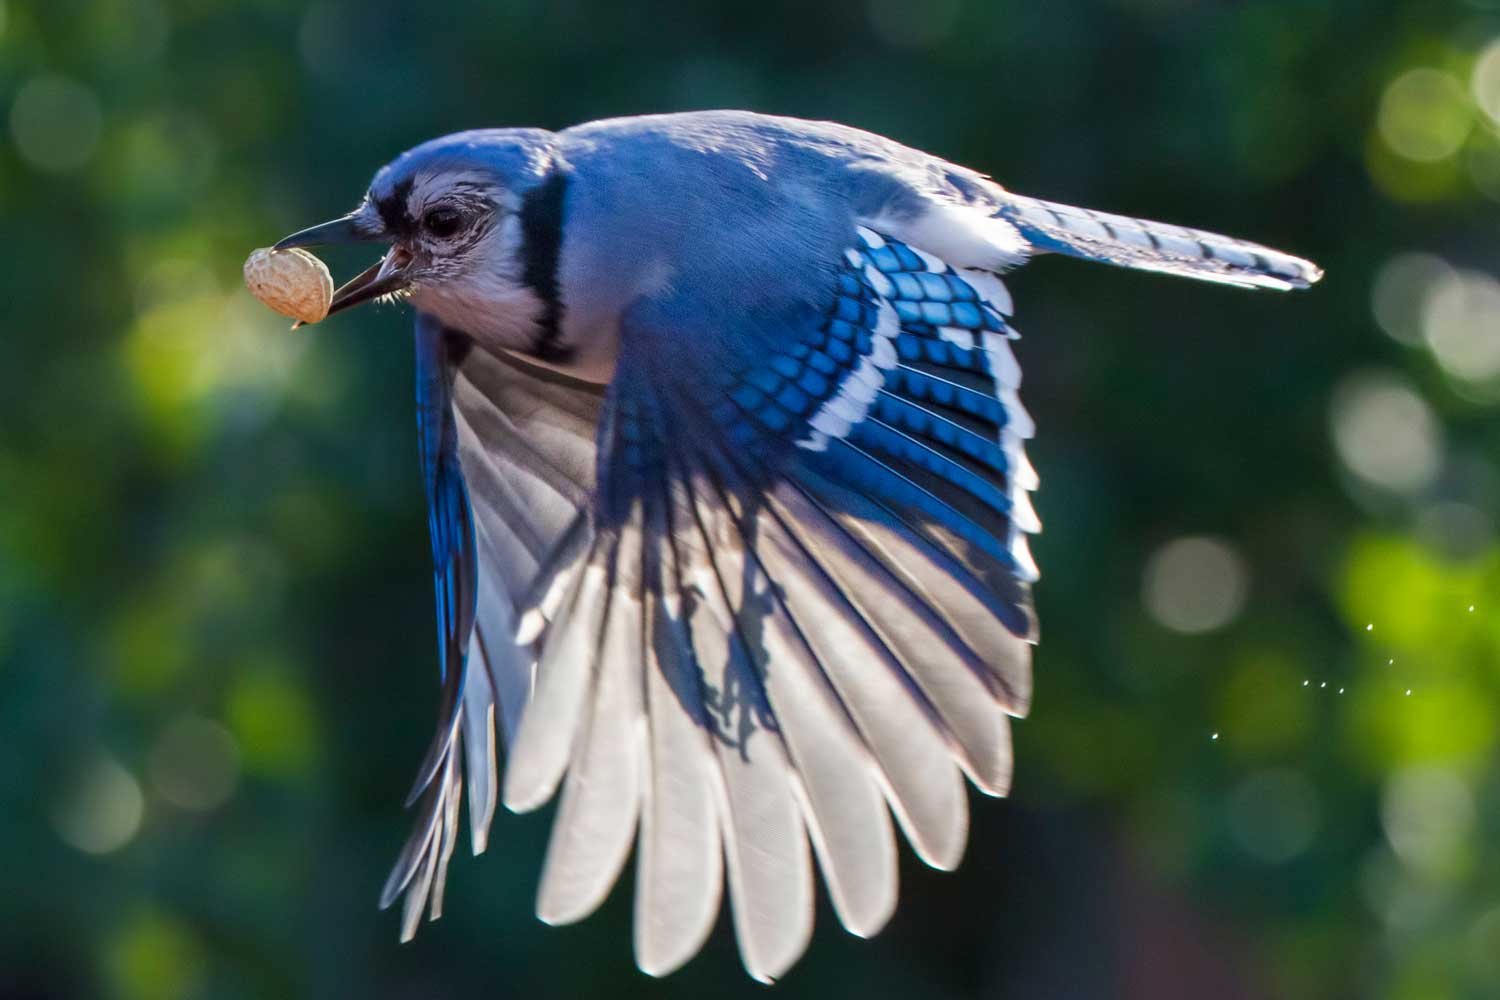 Blue jay flying with a peanut in its mouth.